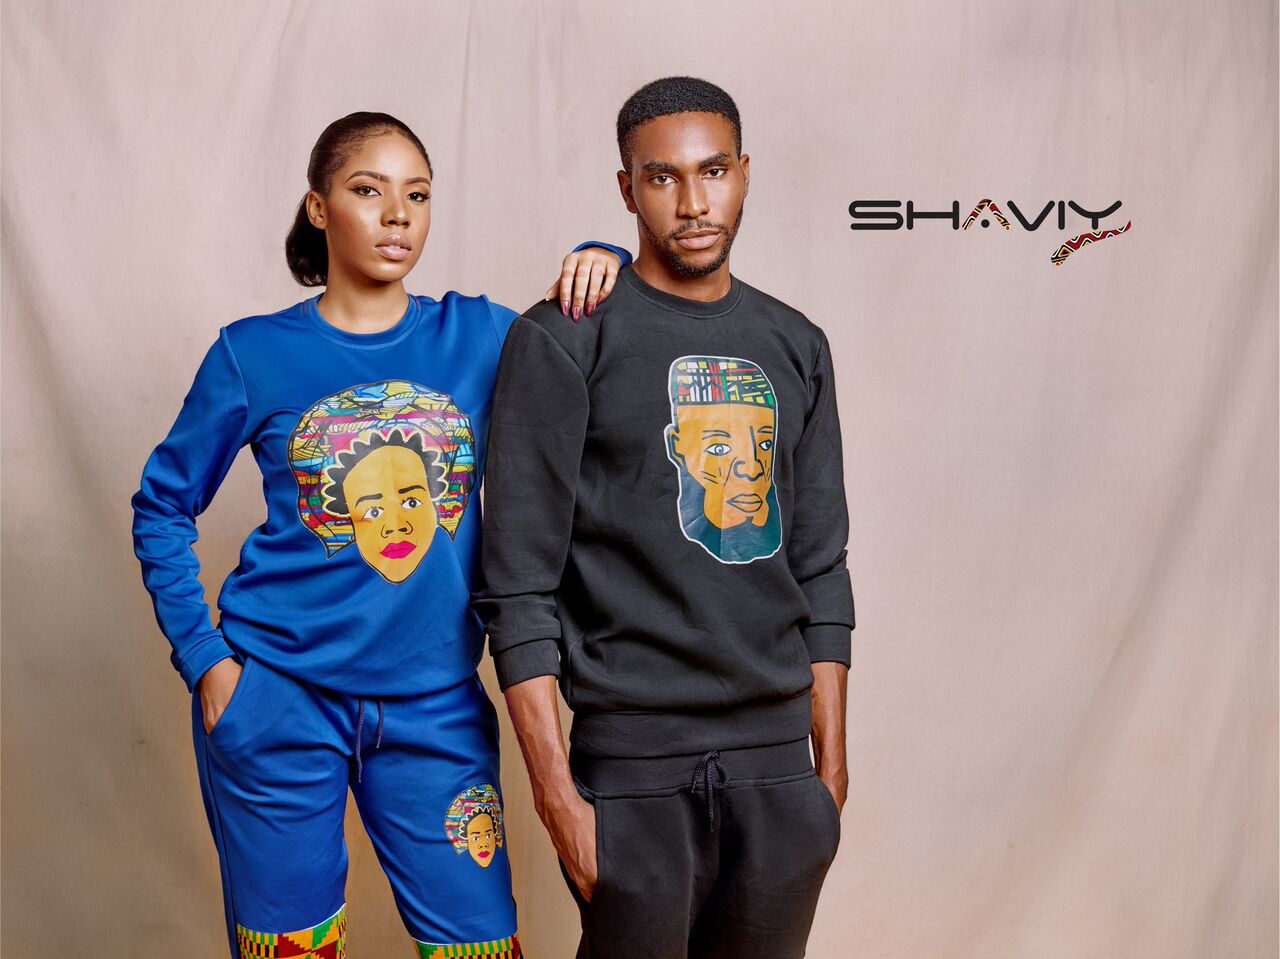 Love Active Wear? Shaviy’s Latest Collection is For You